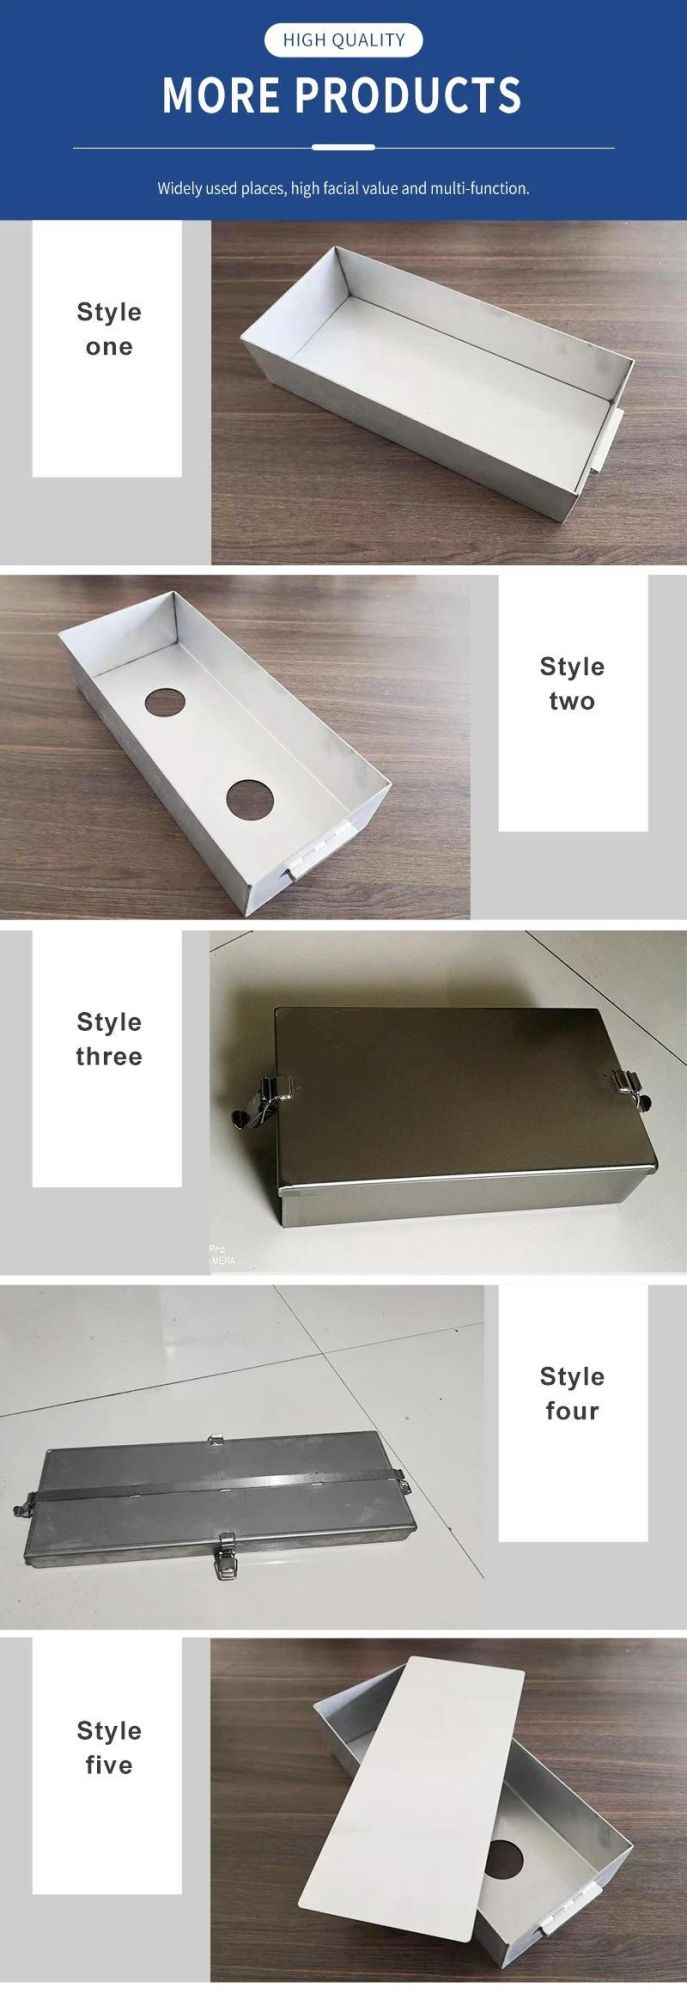 Most Selling Products Rotational Mold Box Quality Assurance Best